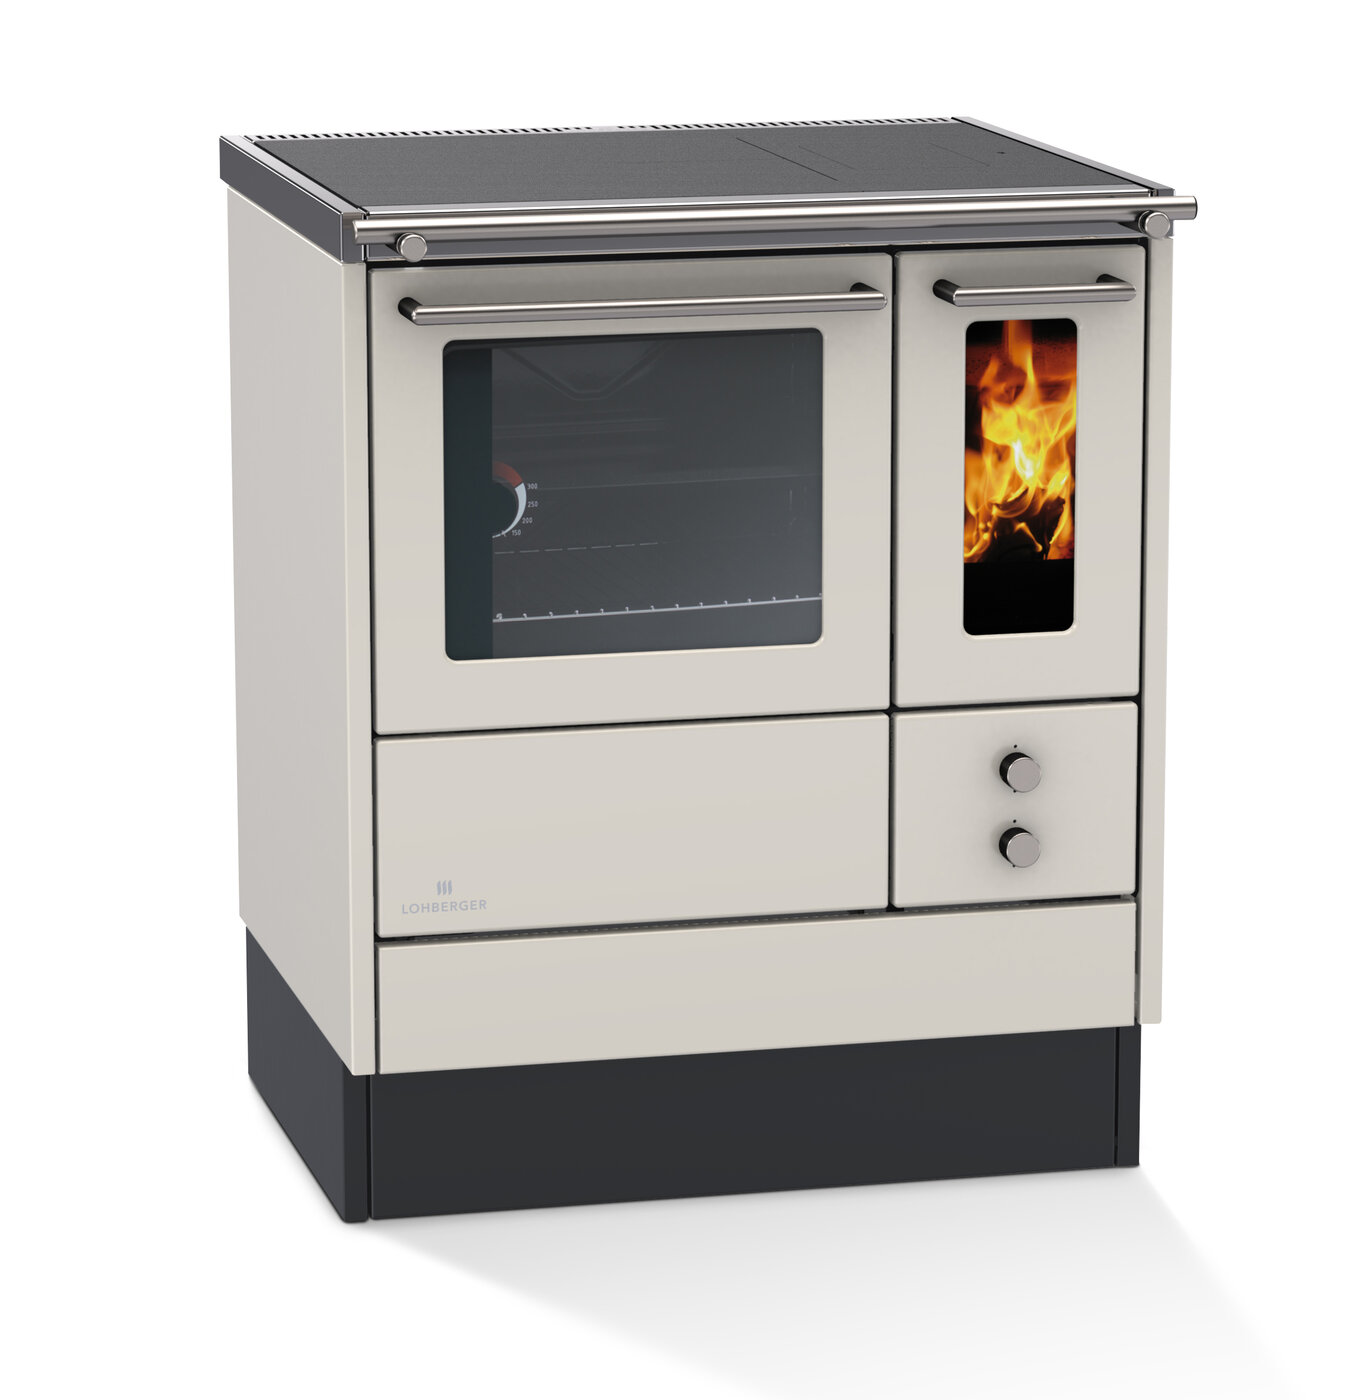 Lohberger LC70 wood cooker